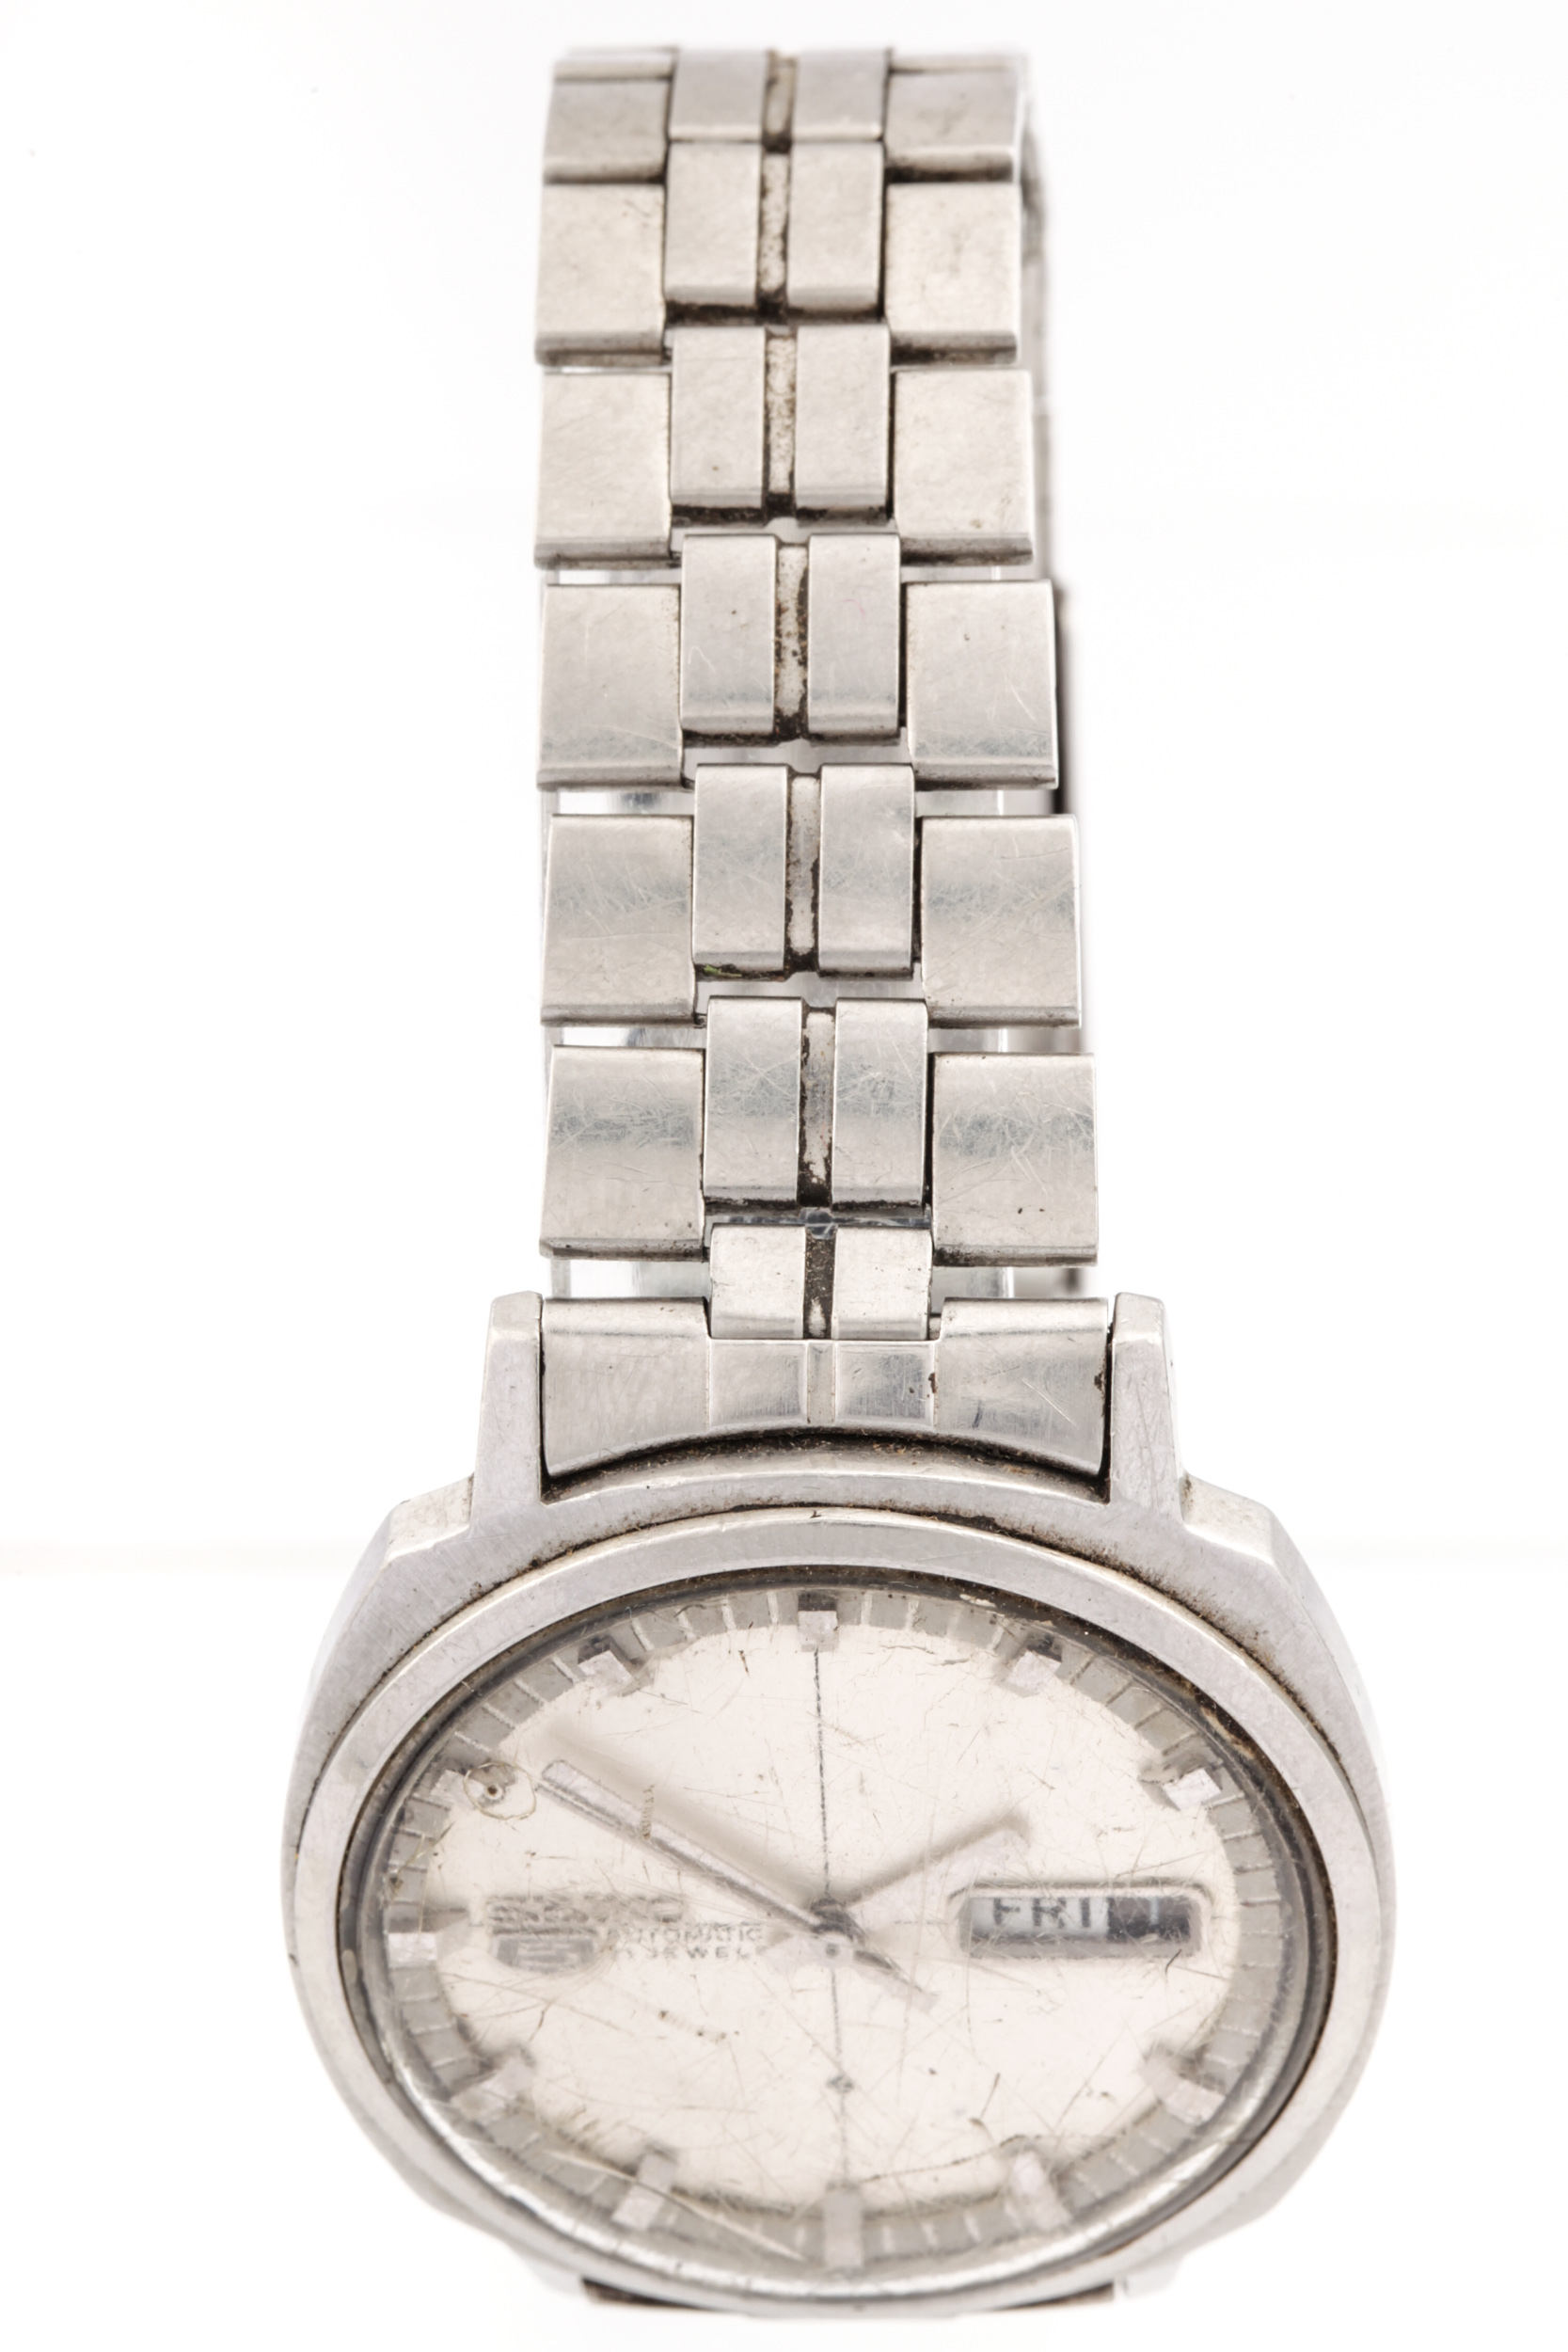 Seiko, 5, a gentleman's stainless steel automatic chronograph bracelet watch. - Image 3 of 6